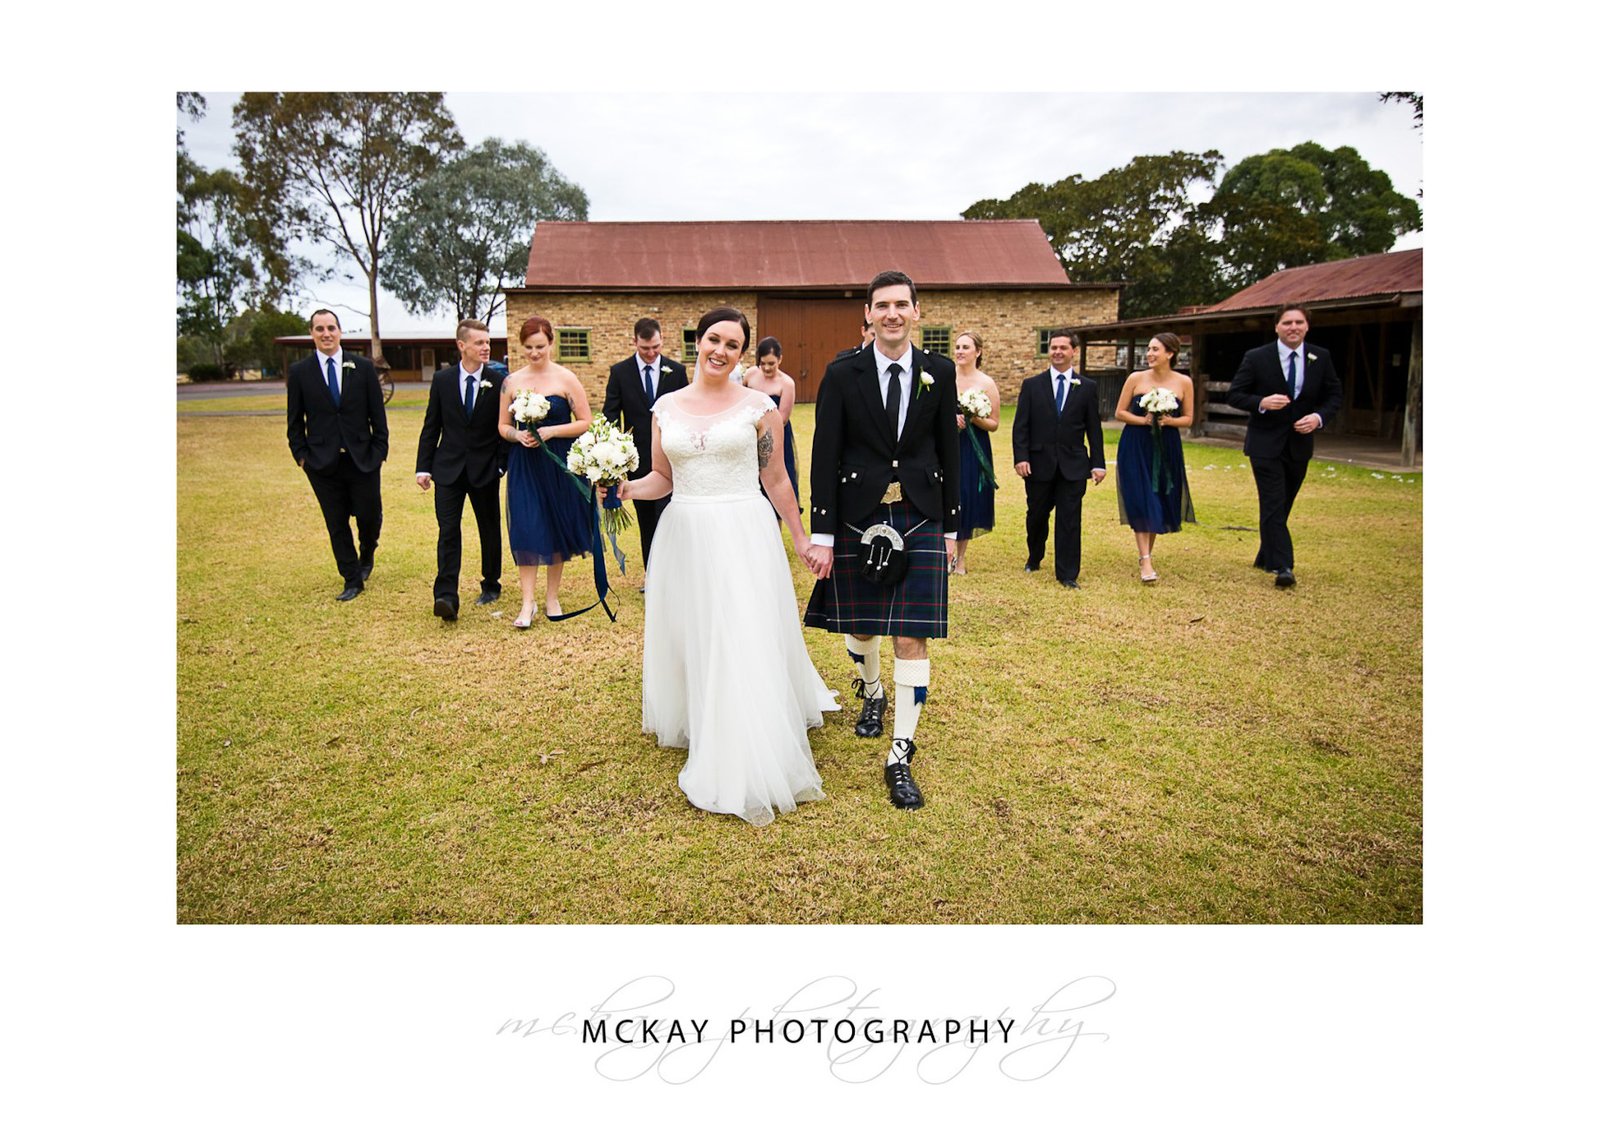 Bridal party at wedding Gledswood Homestead and Winery